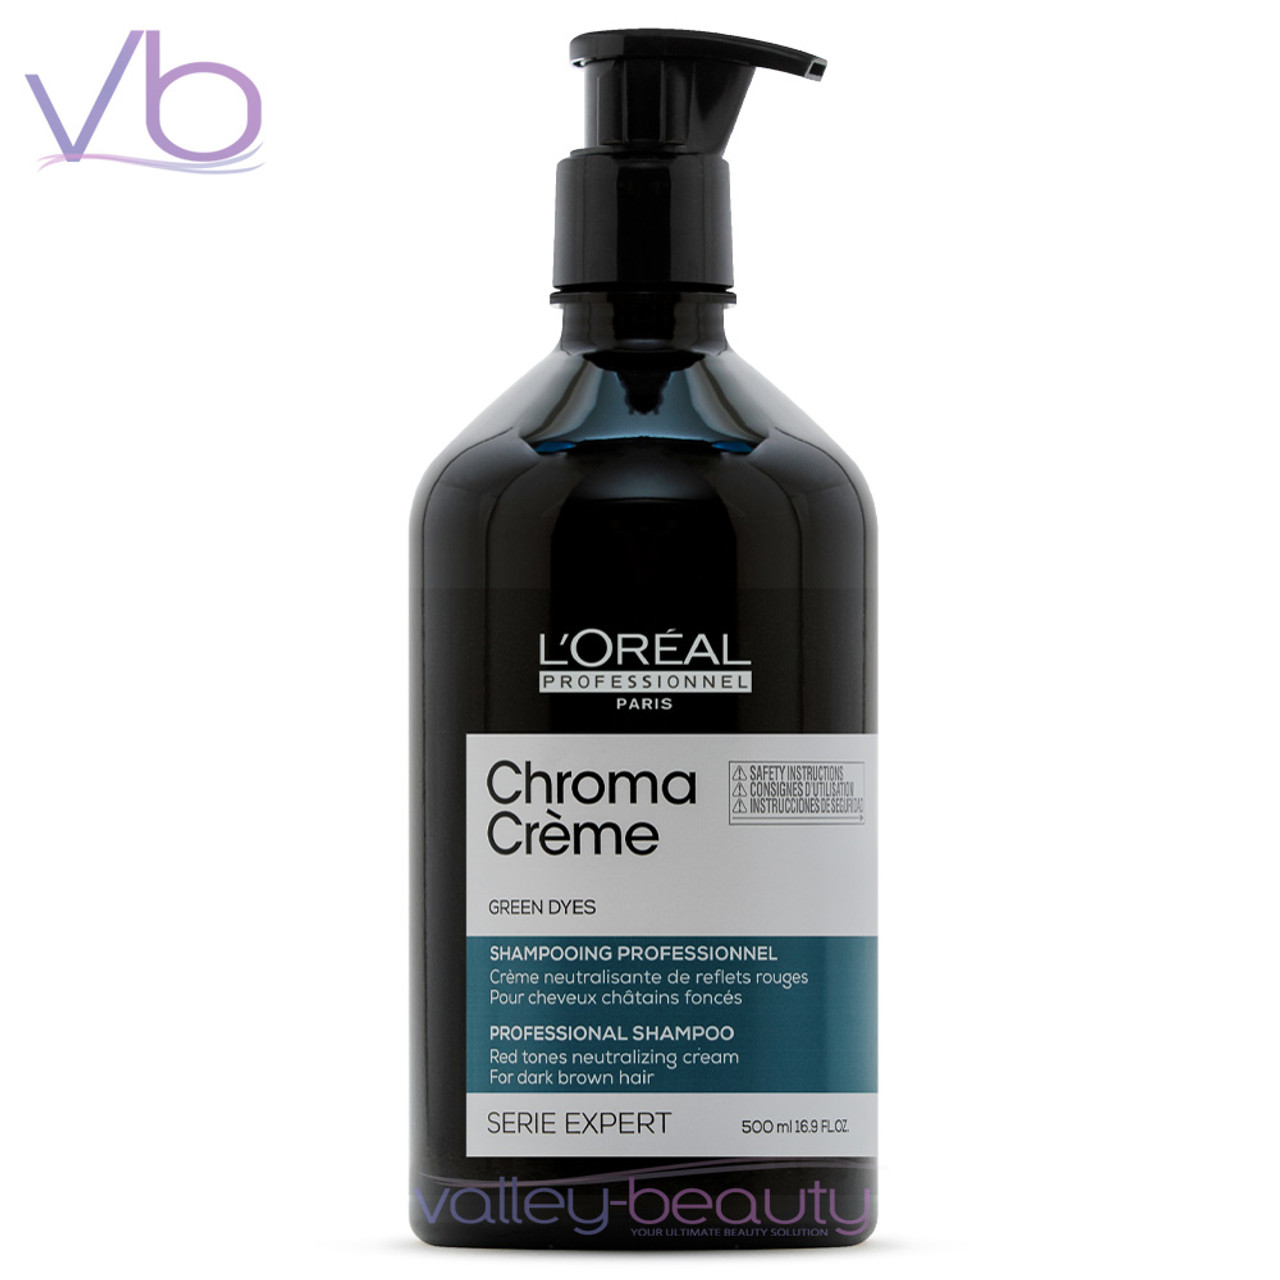 L'Oreal L’Oreal Professionnel Chroma Creme Green Dyes Shampoo | Red Tones Neutralizing Cleanser for Dark Brown Hair, 16.9oz